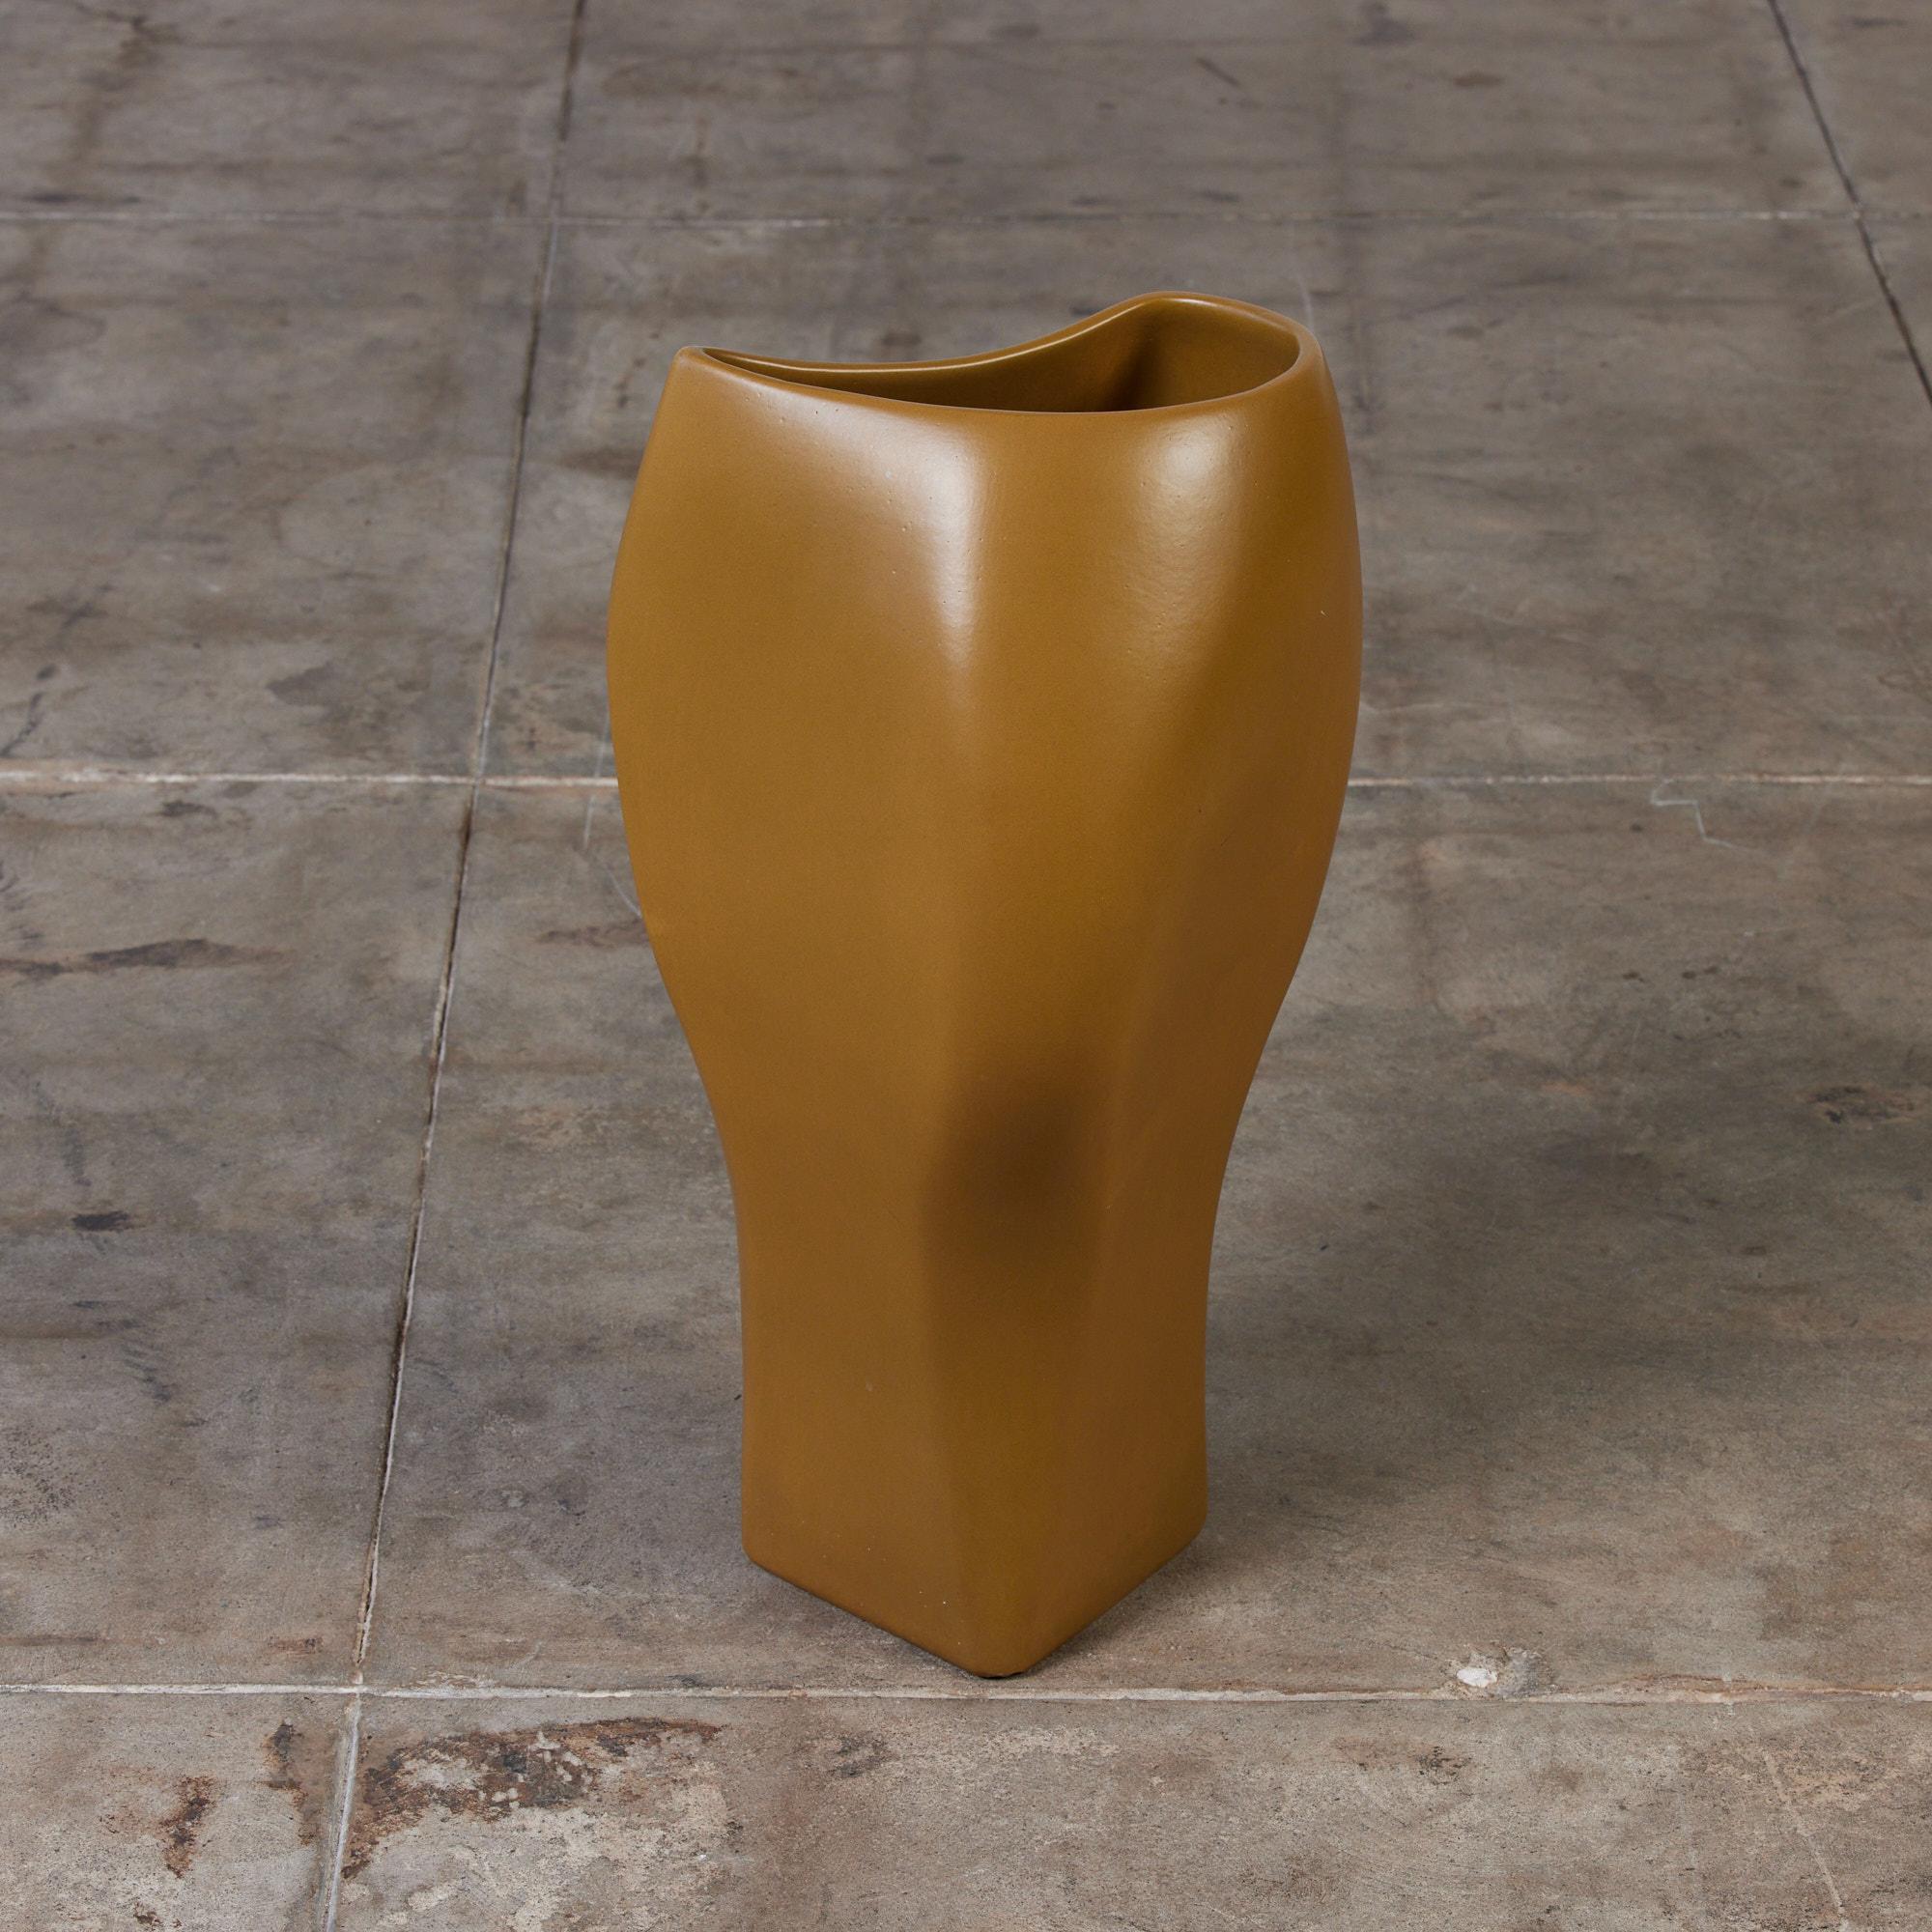 Mid-20th Century David Cressey Sculptural Planter for Architectural Pottery